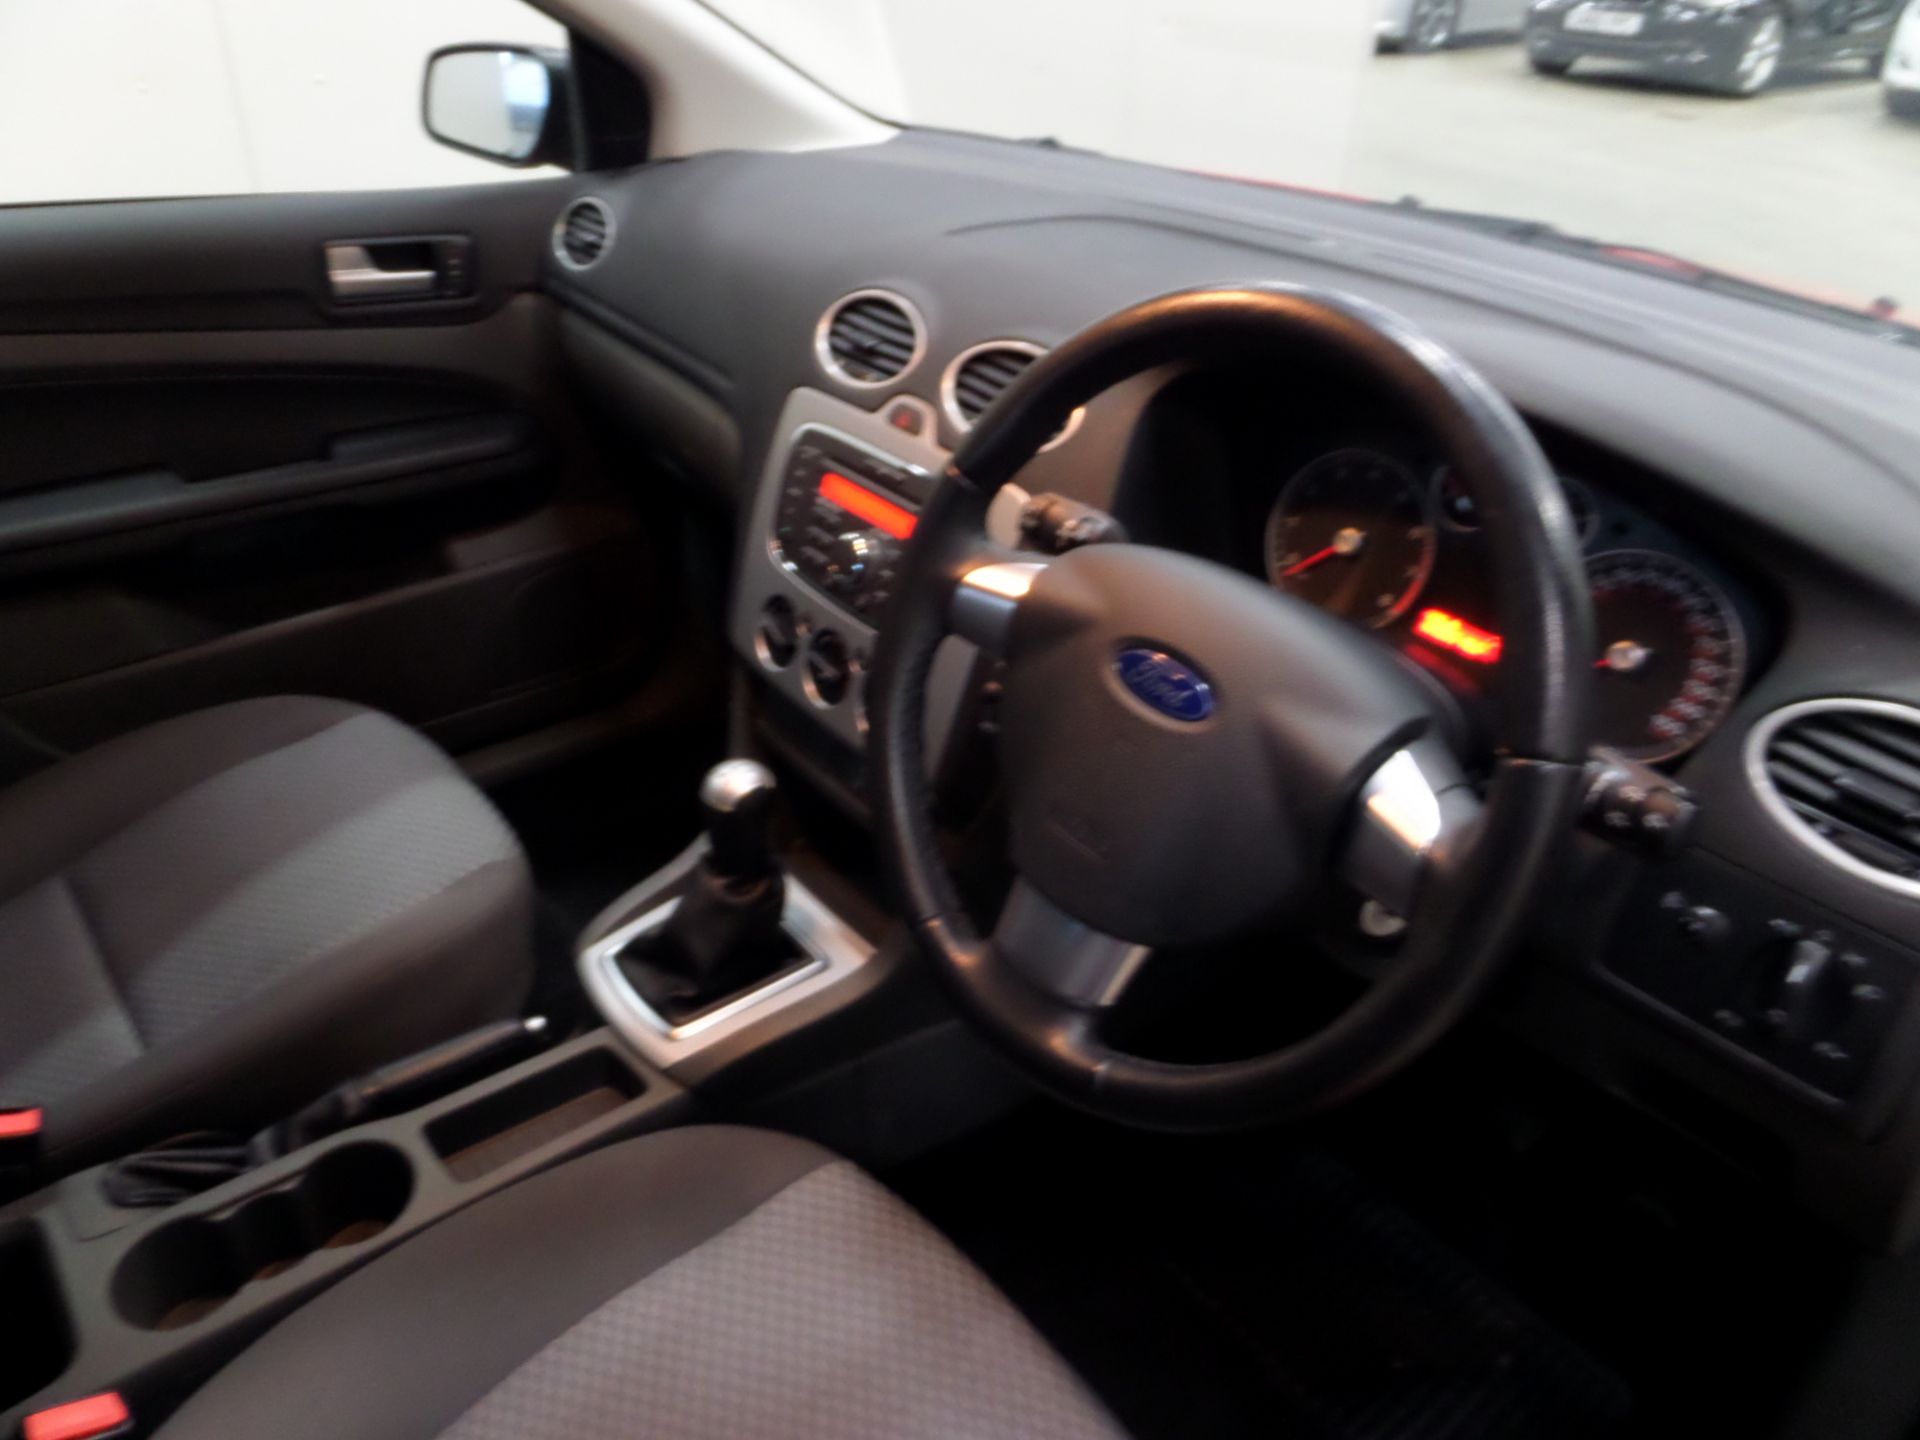 Ford Focus Style - 1596cc 5 Door - Image 7 of 9